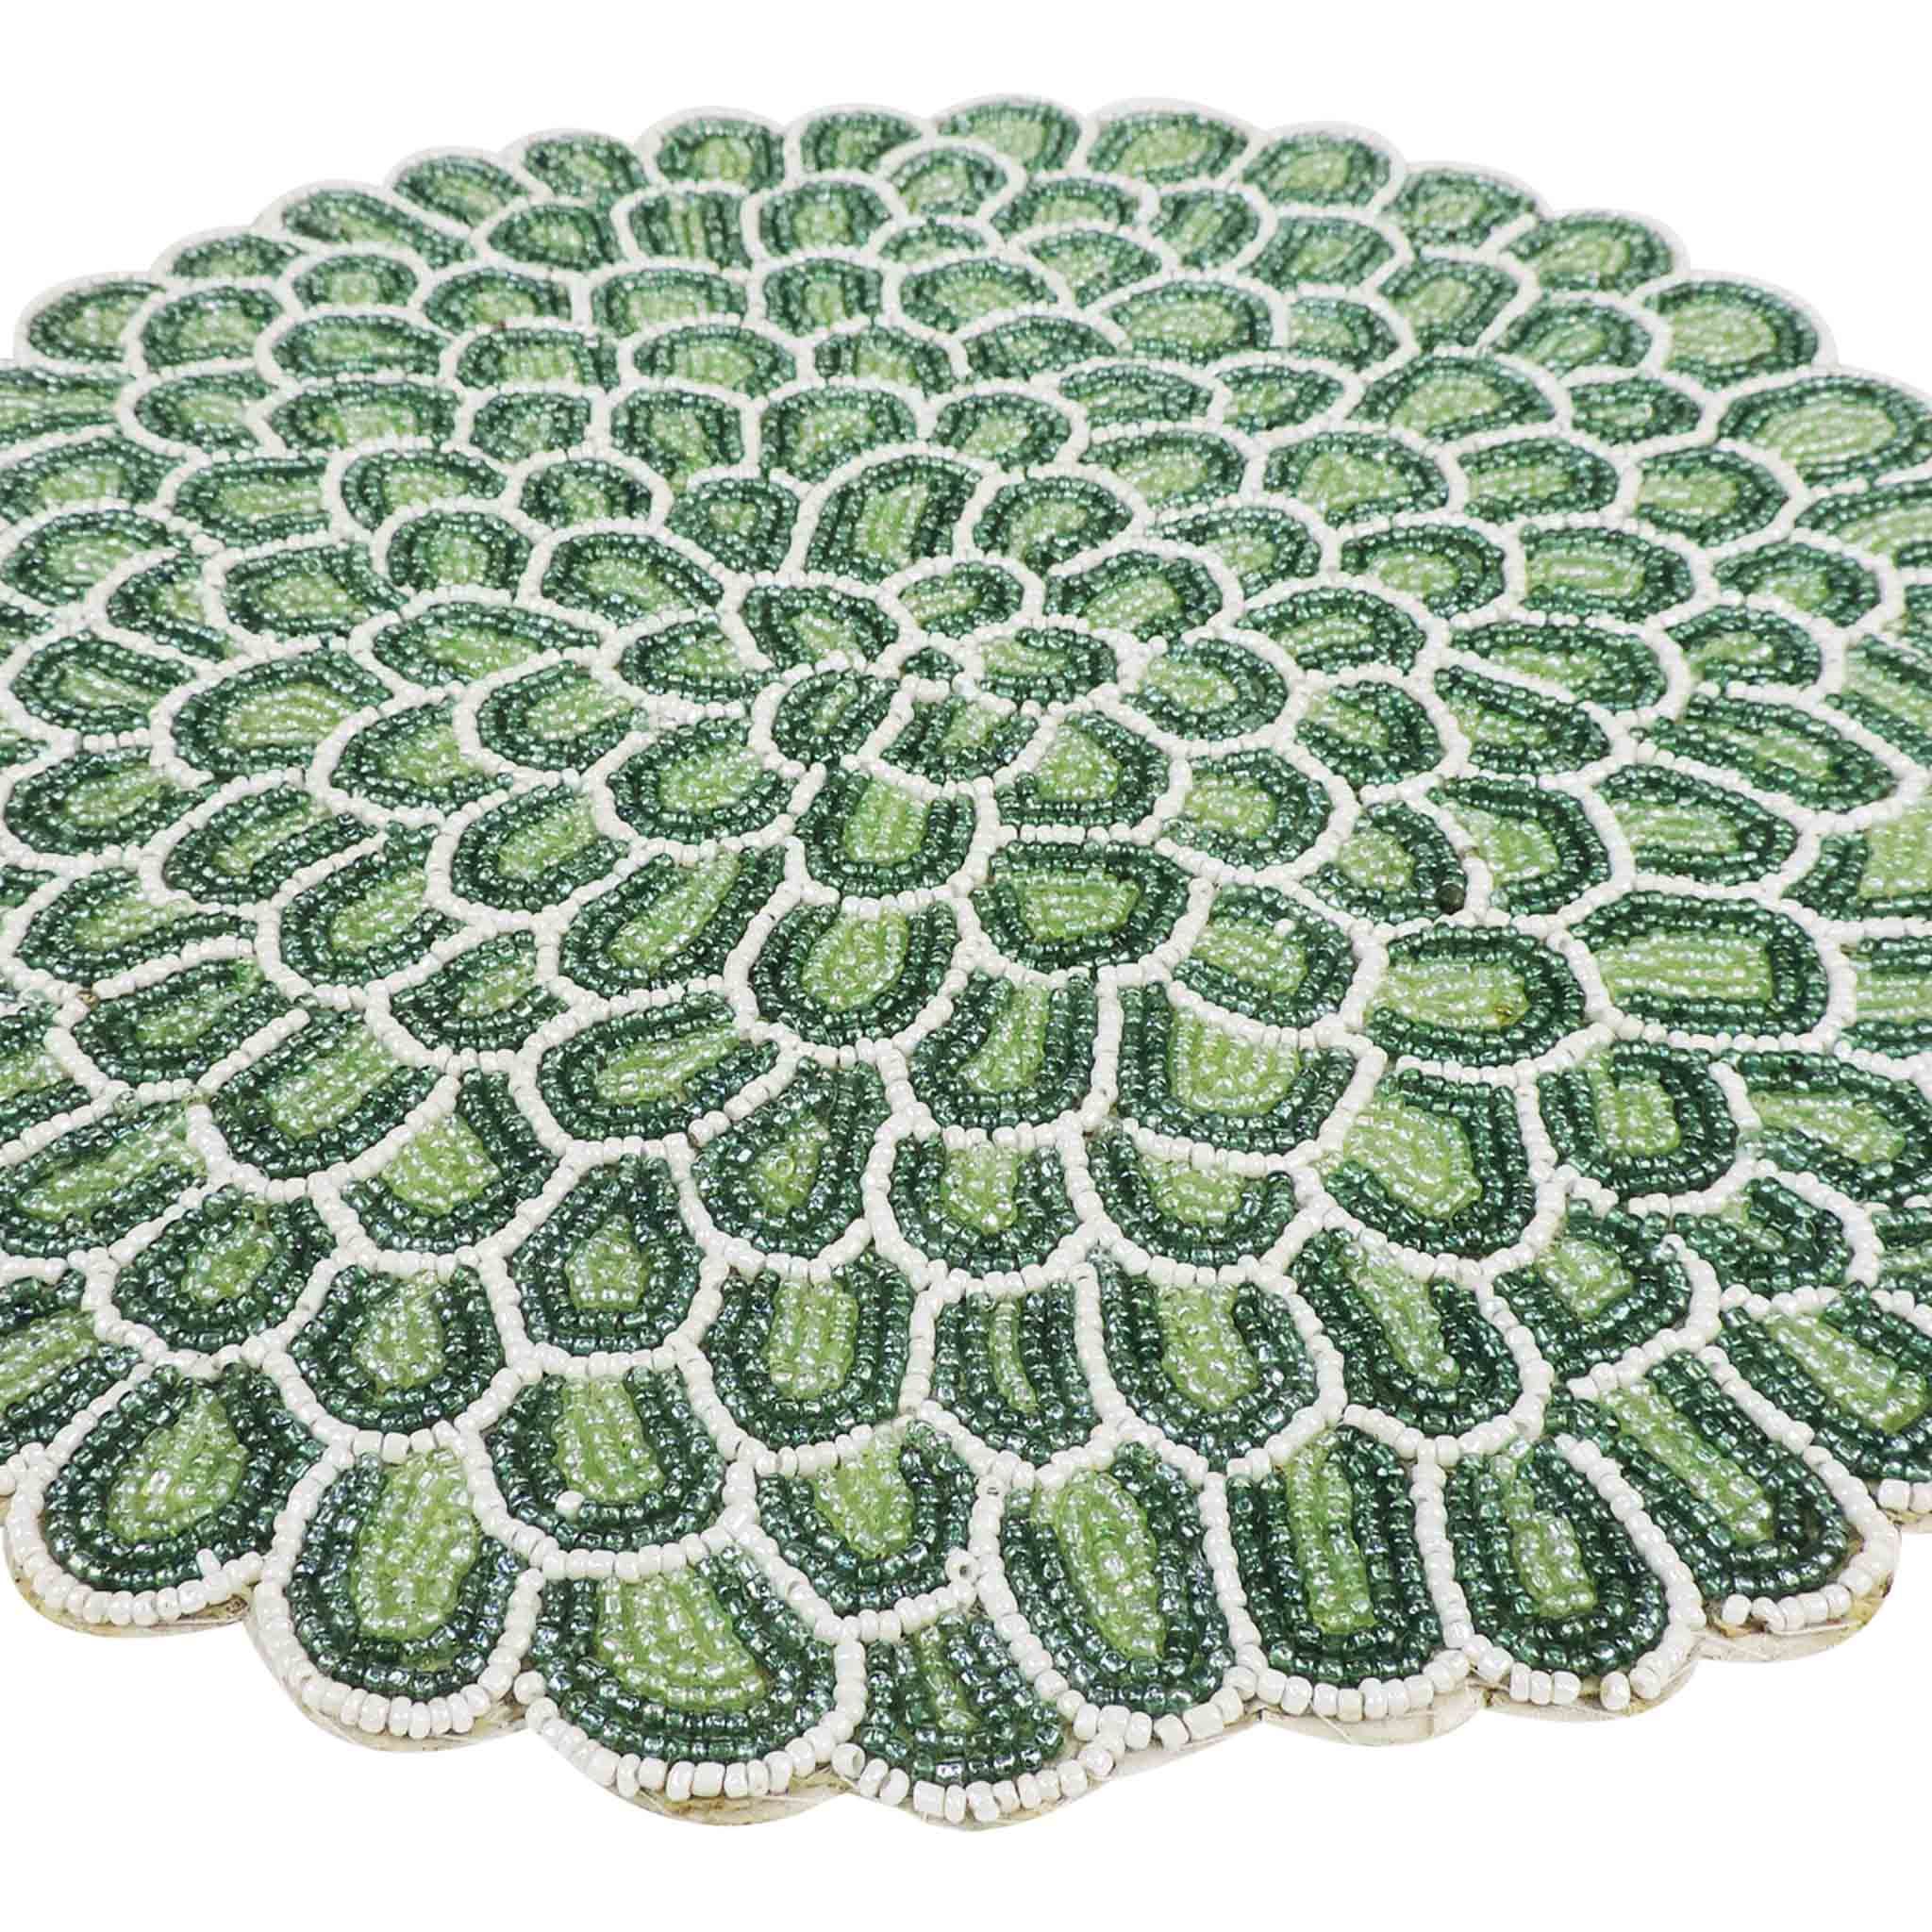 Dahlia Bead Embroidered Placemat in Green, Set of 2/4